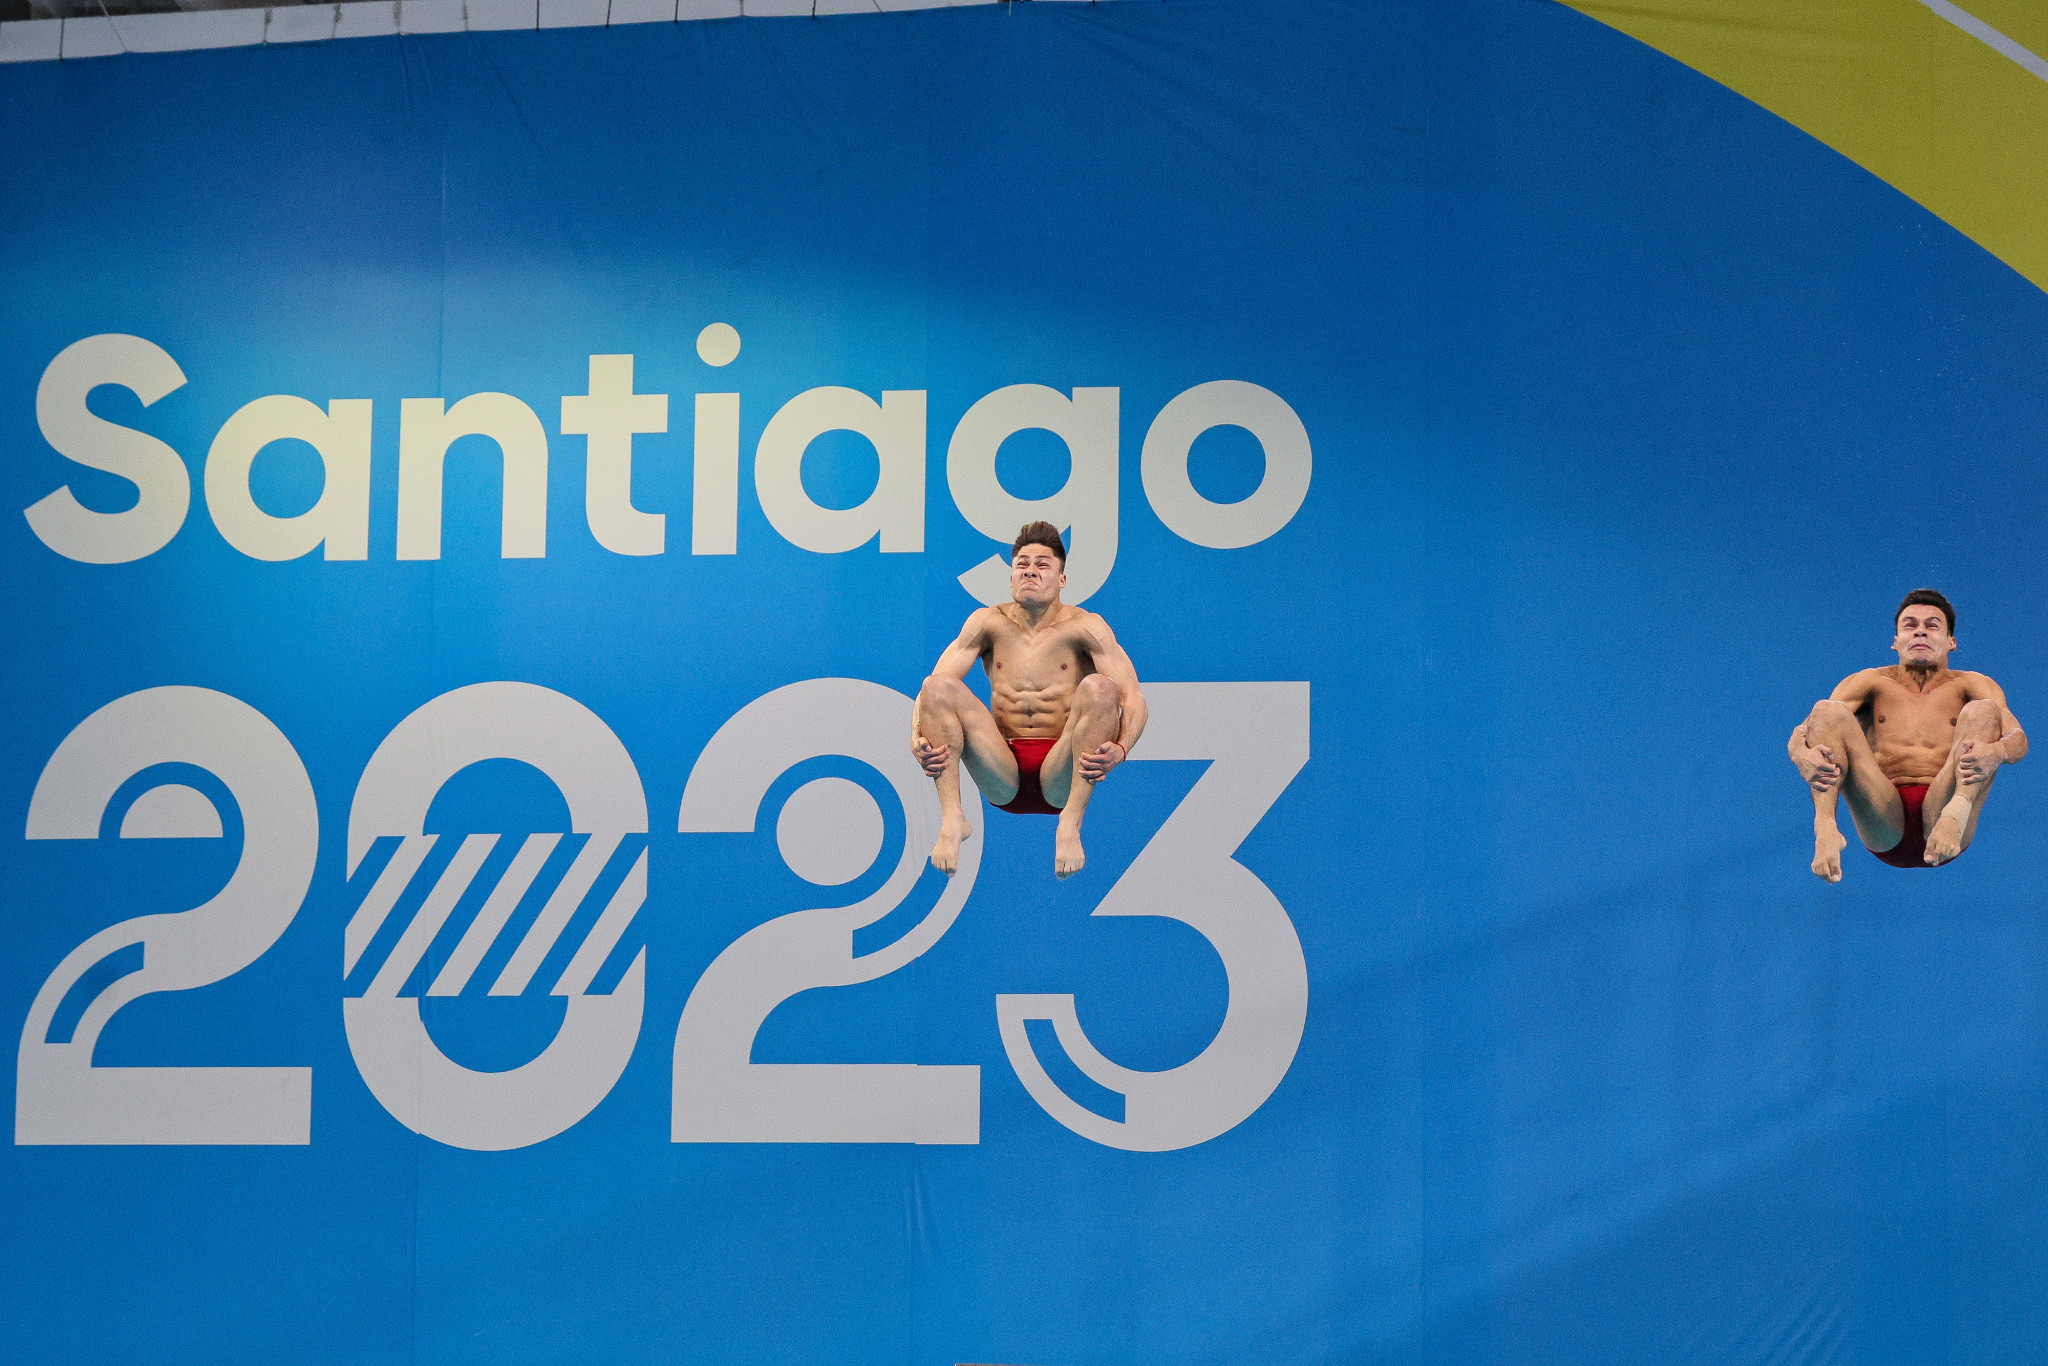 Medals continue to flow at Santiago 2023 Pan American Games